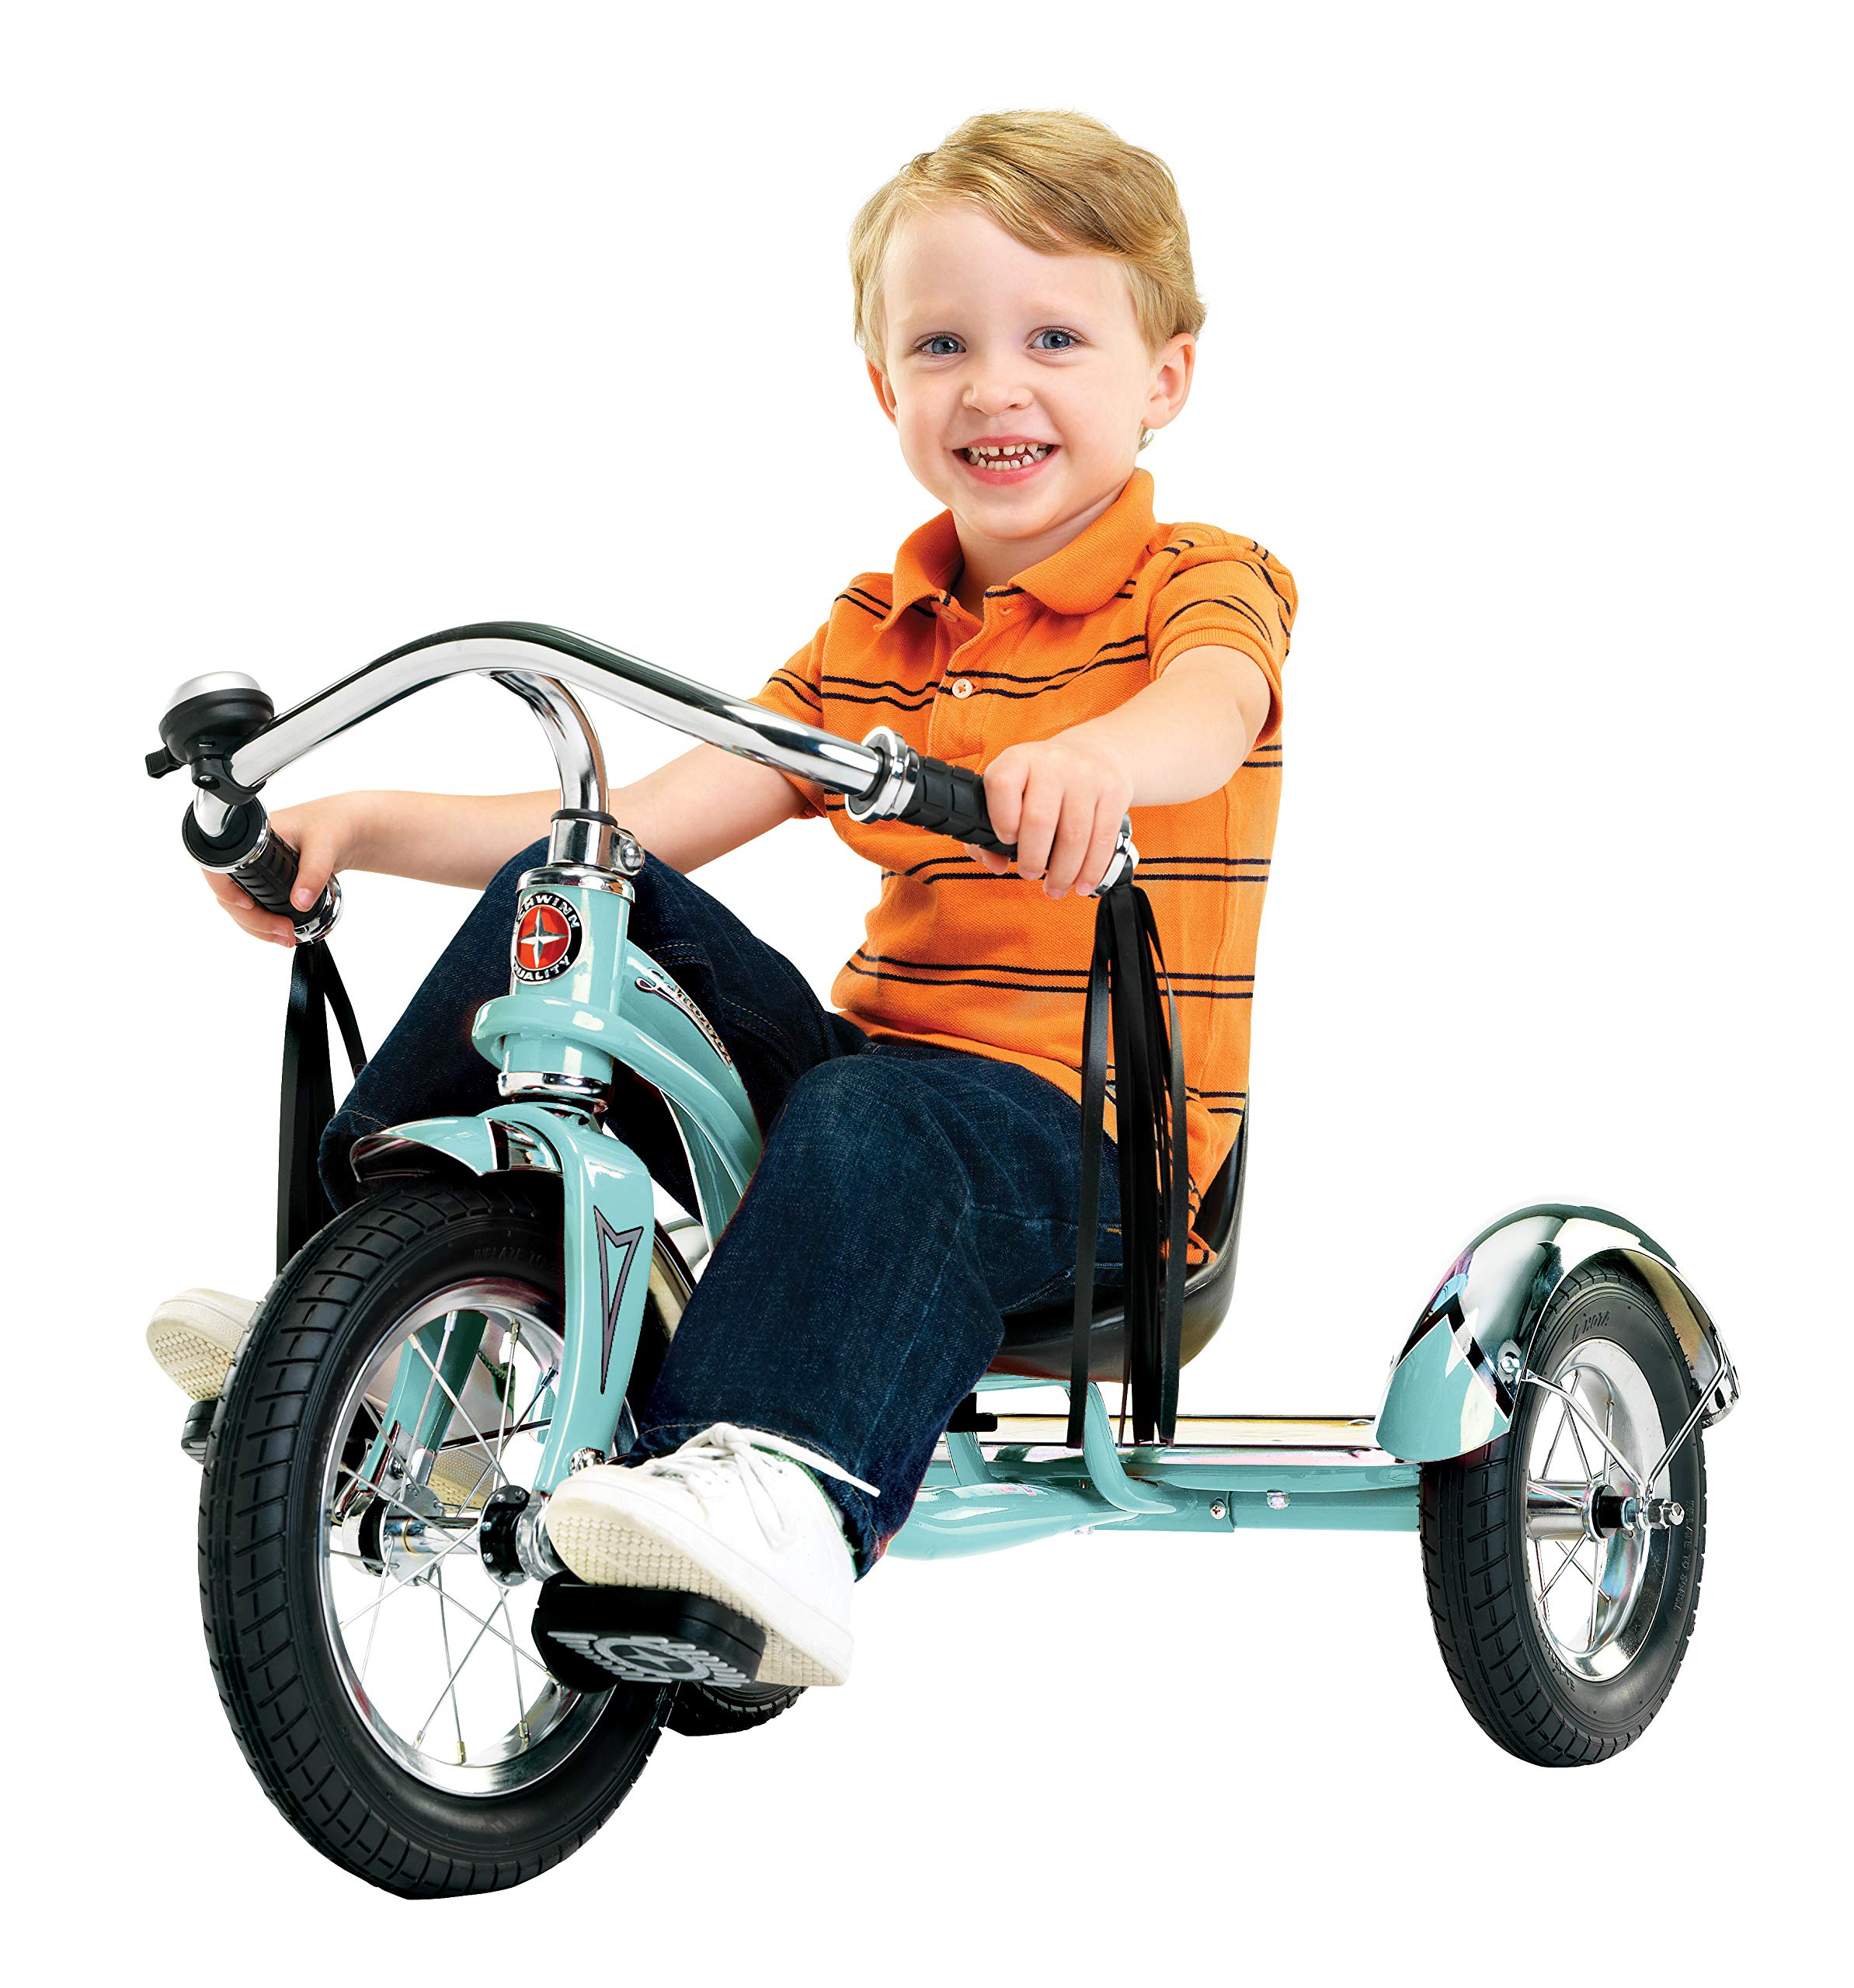 Schwinn Roadster Bike for Toddler, Kids Classic Tricycle, Low Positioned Steel Trike Frame with Bell and Handlebar Tassels, Rear Deck Made of Genuine Wood, for Boys and Girls Ages 2-4 Year Old, Teal